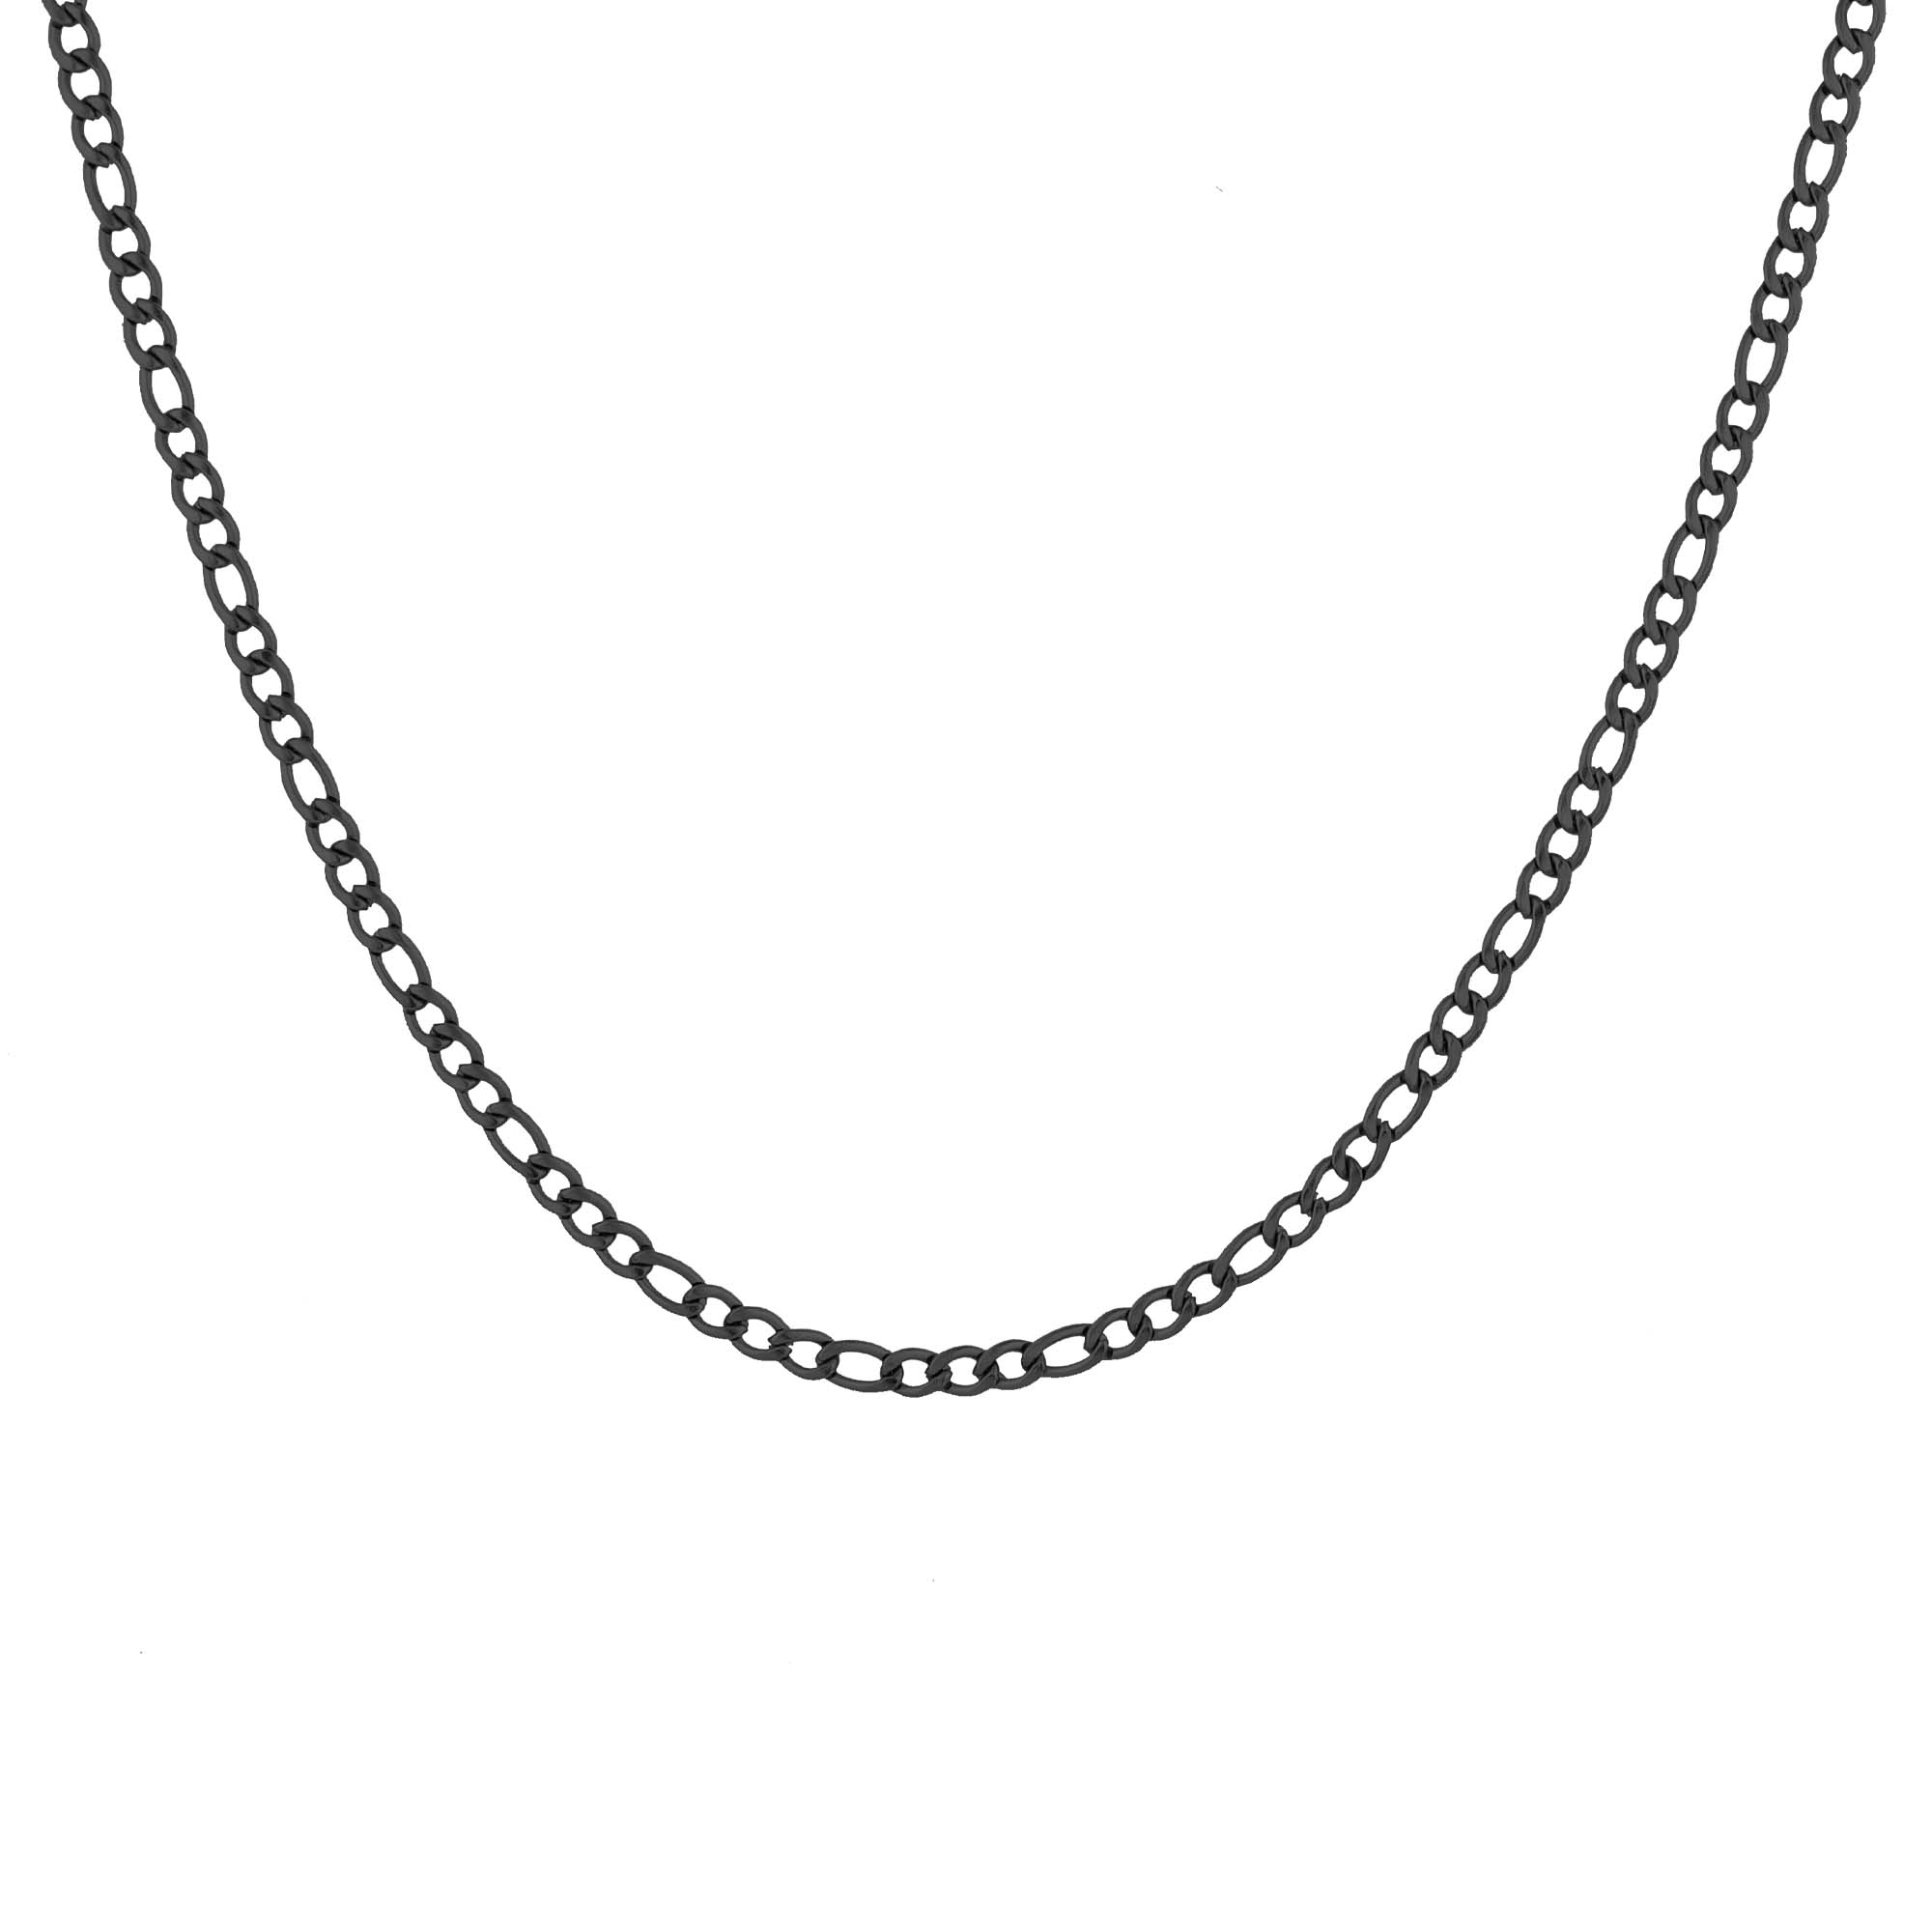 FJ Watches figaro necklace chain black men 4mm 65cm stainless steel